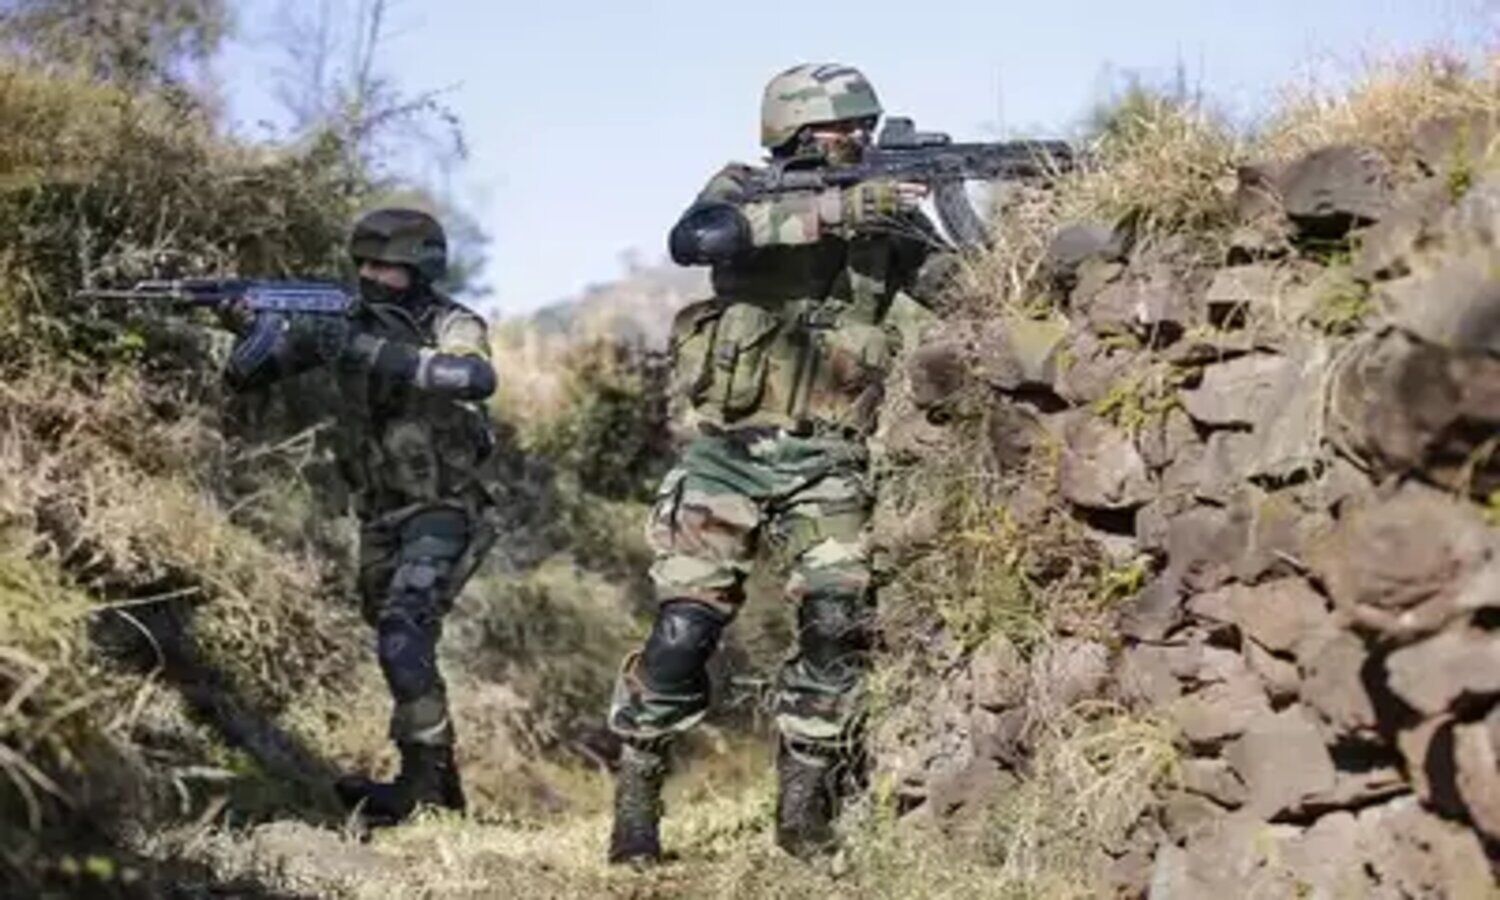 J&K Encounter: Encounter between security forces and terrorists at 2 places in Shopian, 4 terrorists killed